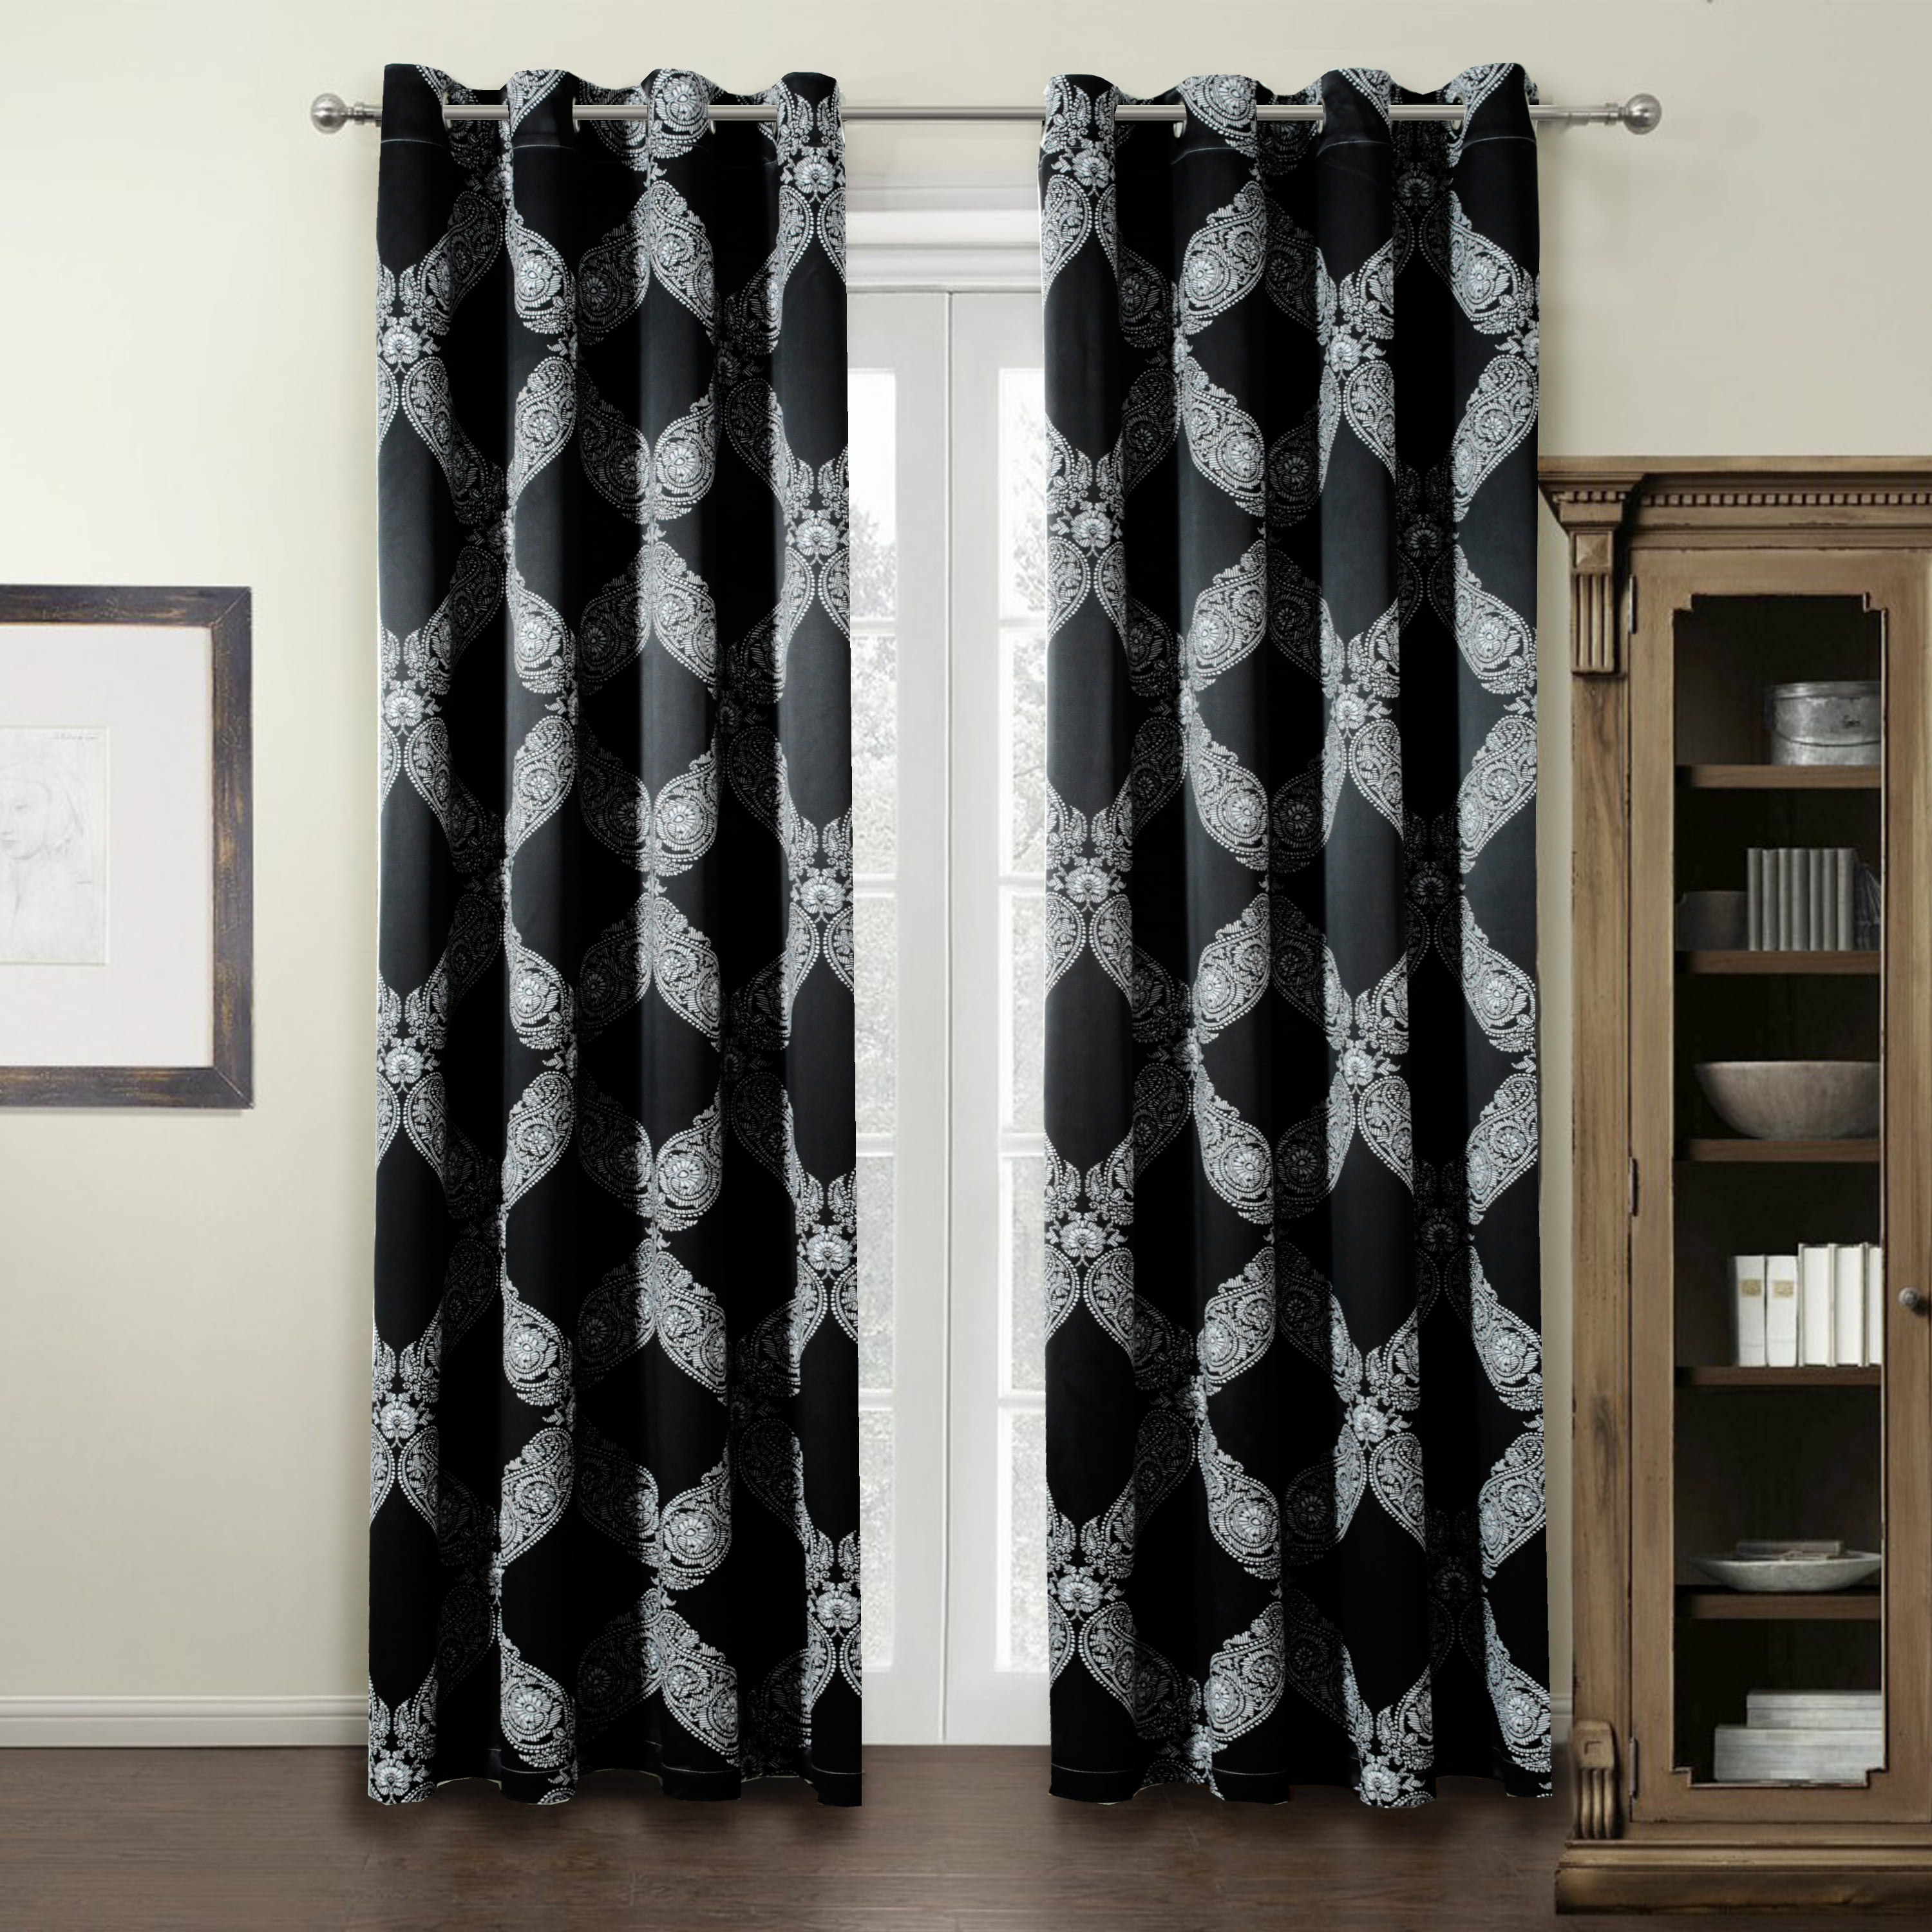 Soft and Smooth Printed Energy Saving Blackout Curtains for Living Room